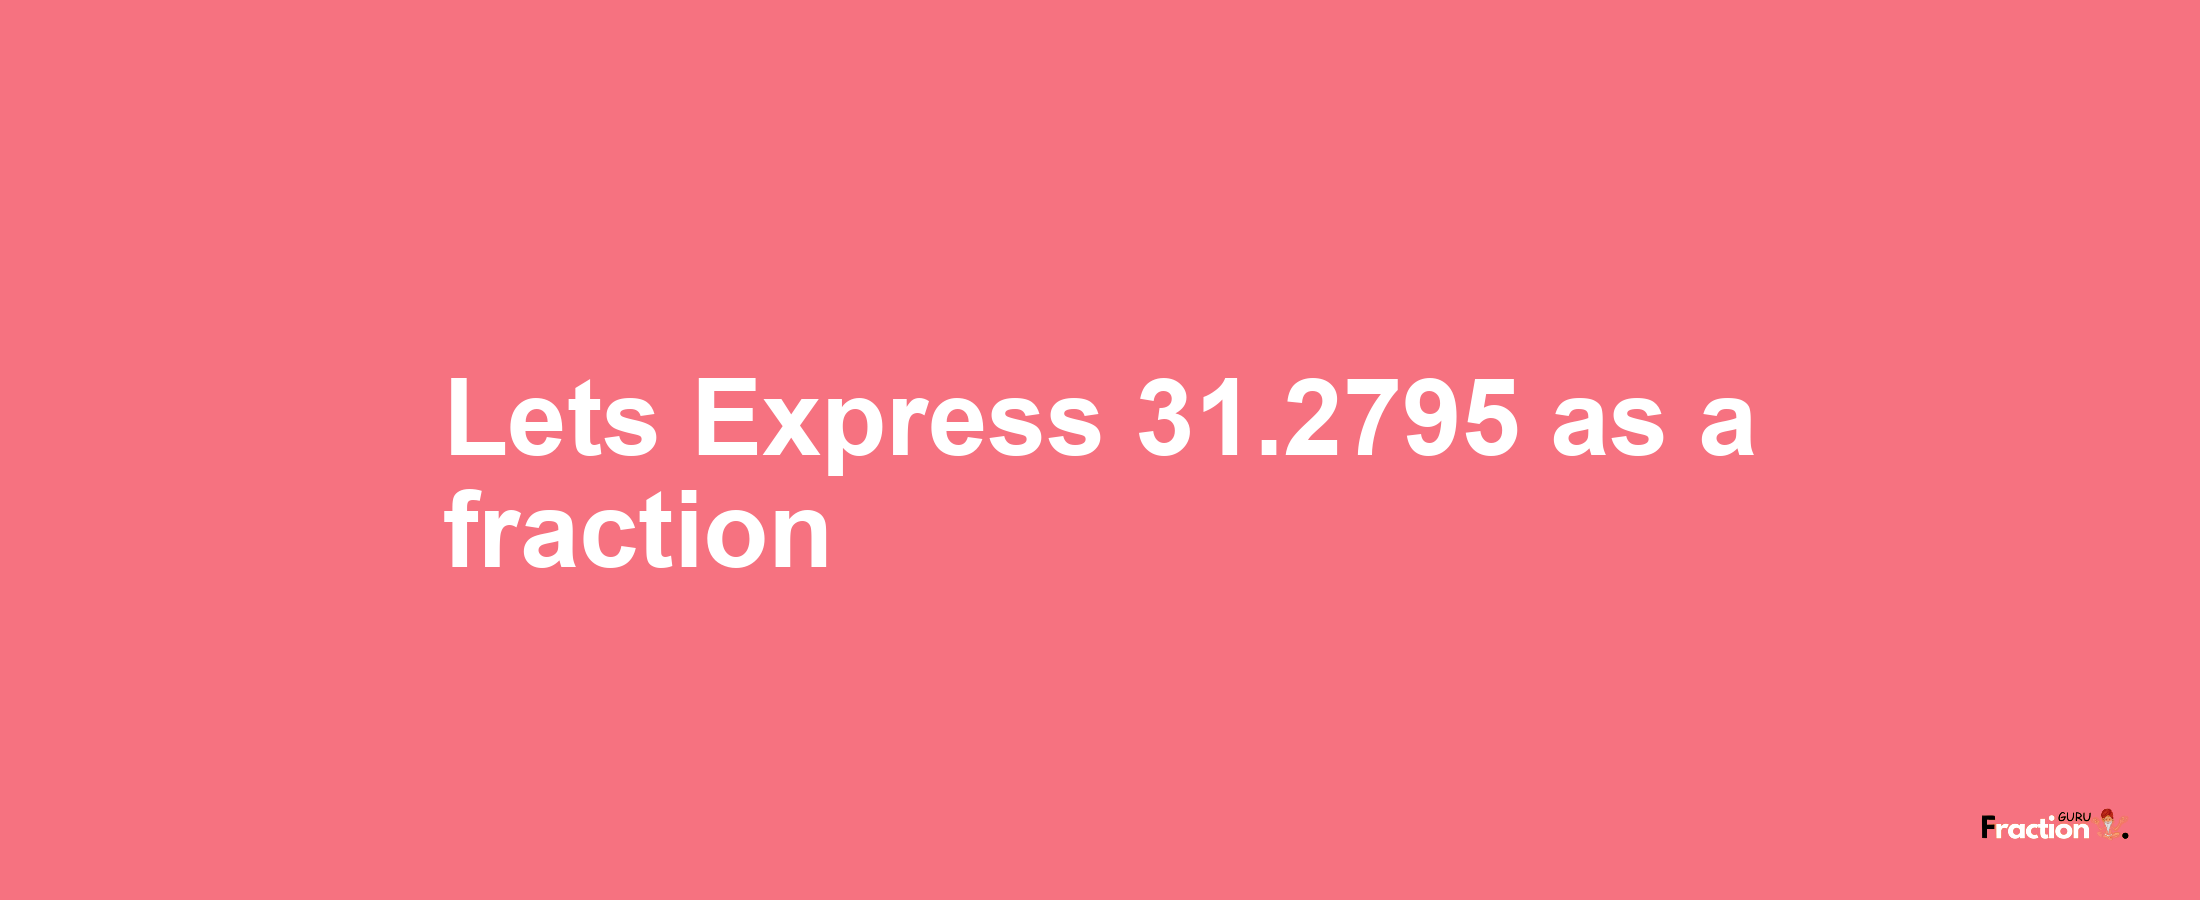 Lets Express 31.2795 as afraction